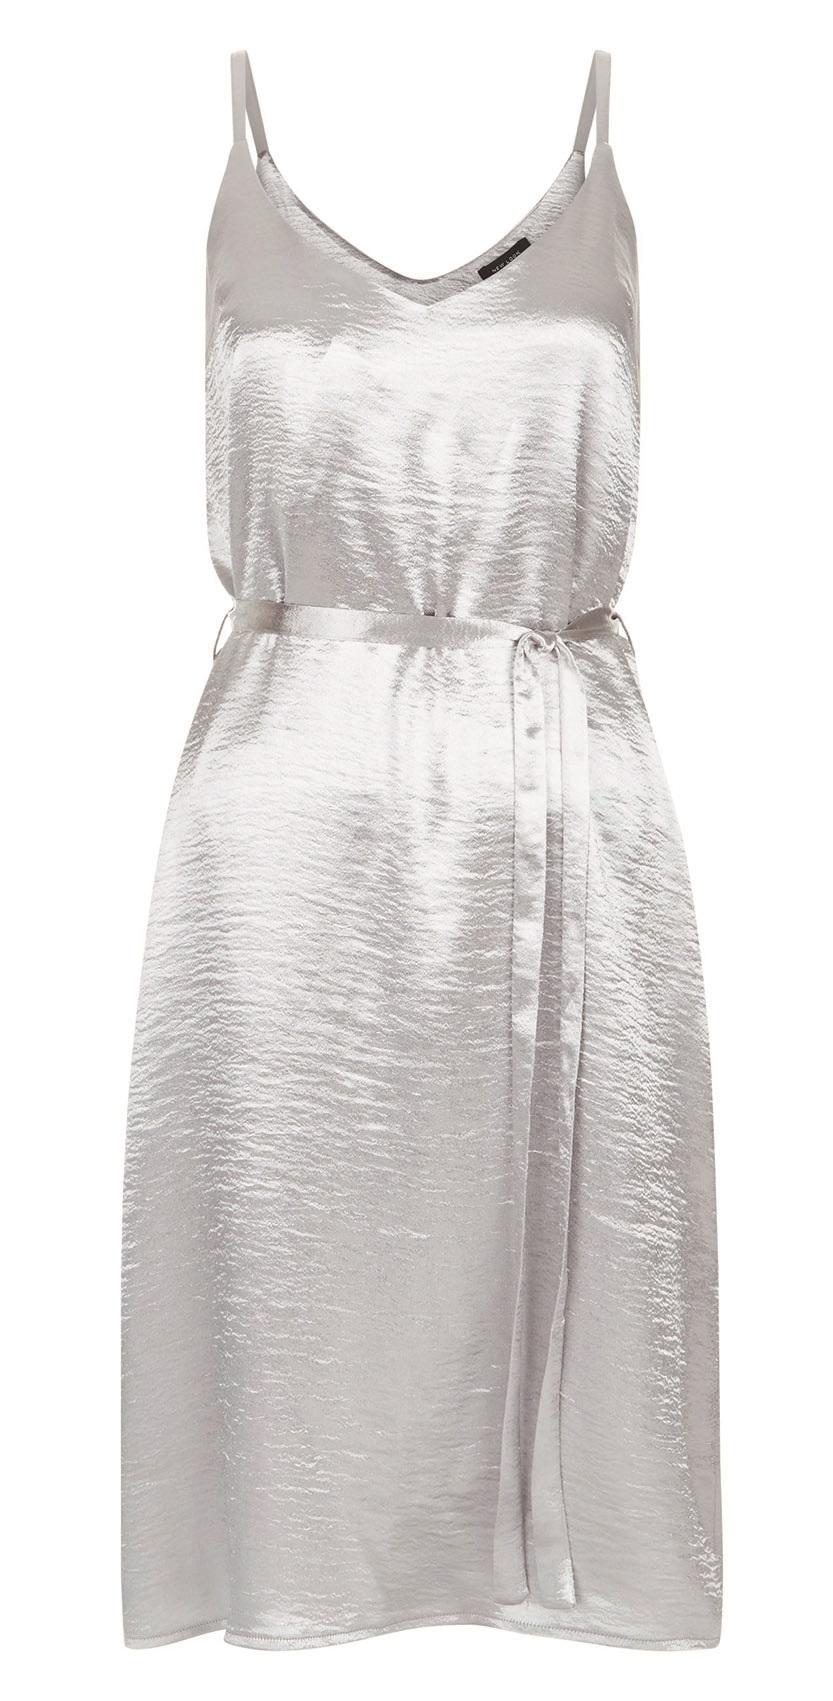 New Look, Silver Cami Dress, £19.99